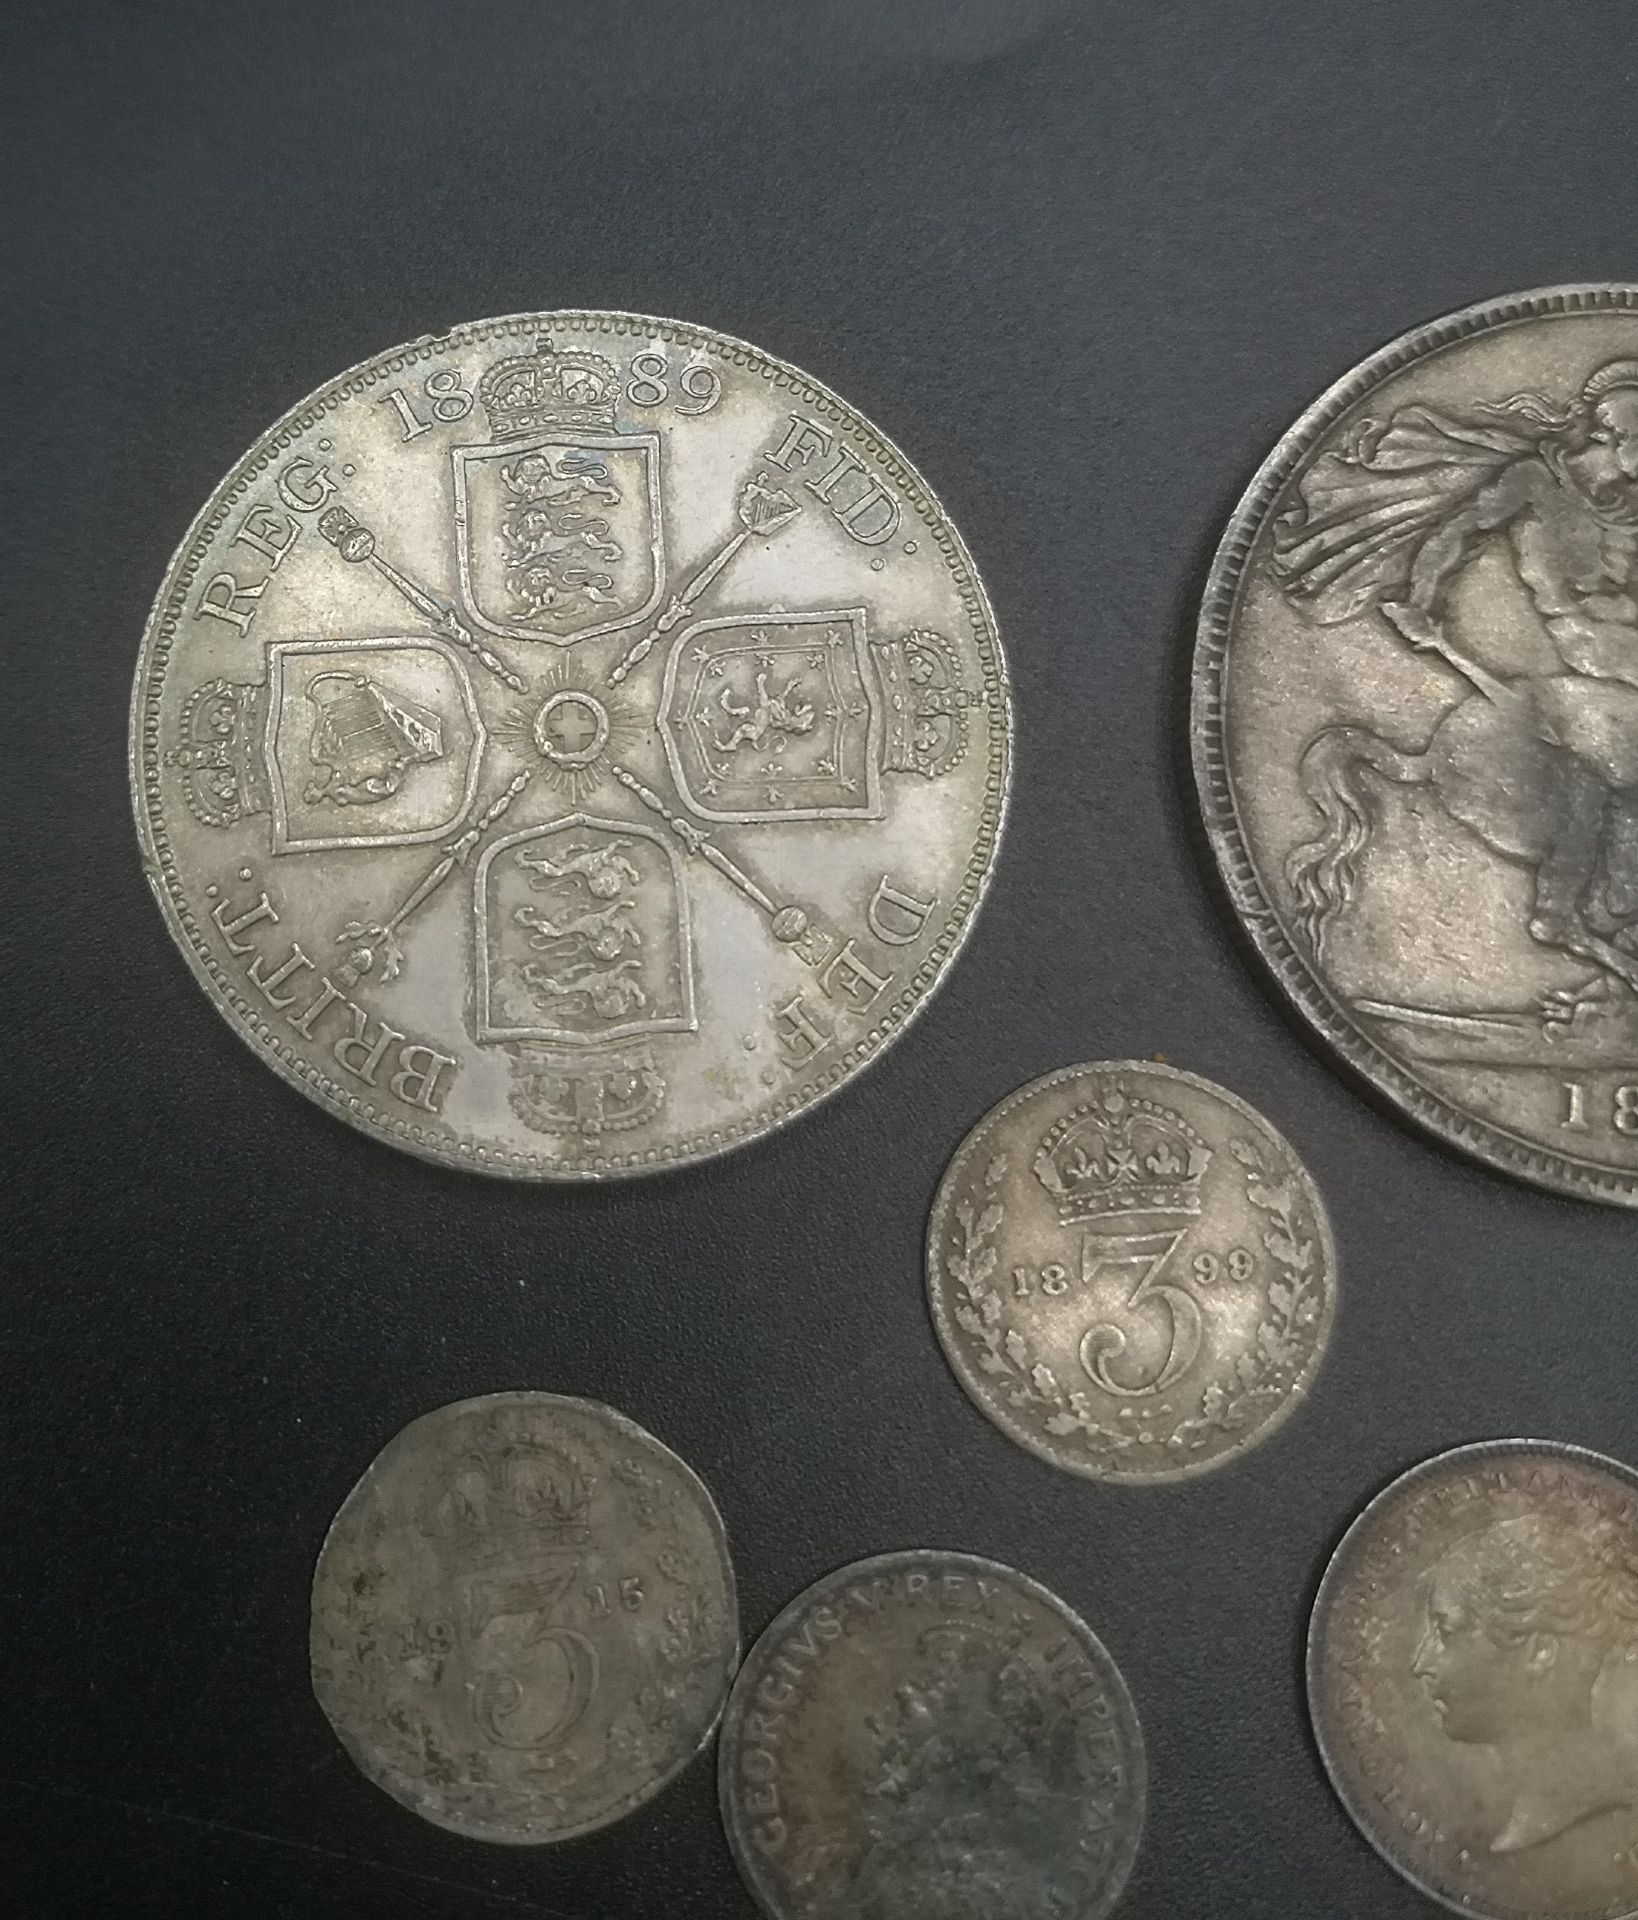 Queen Victoria crown 1890, double florin 1889, and 4 other silver coins - Image 2 of 8